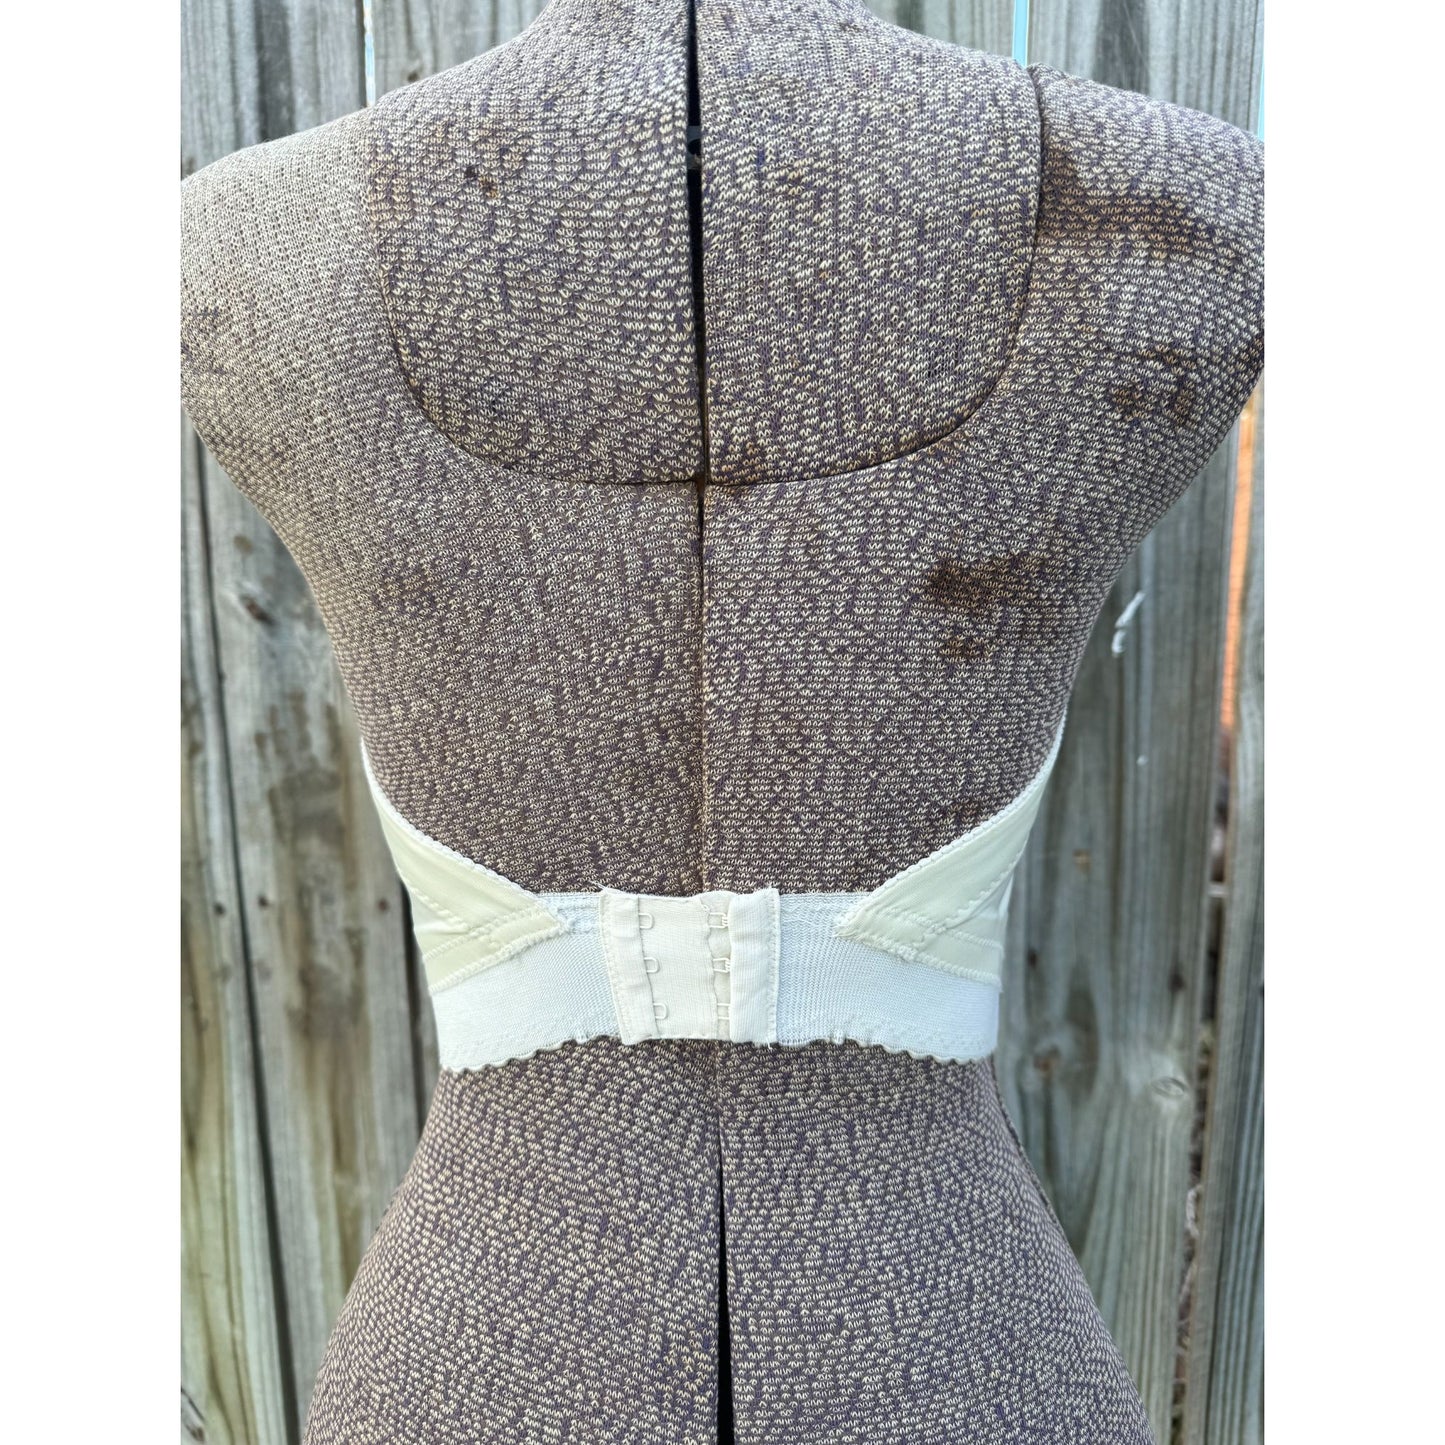 80's BackLess by Smoothie Ivory Lace Plunging Bustier Top 32B